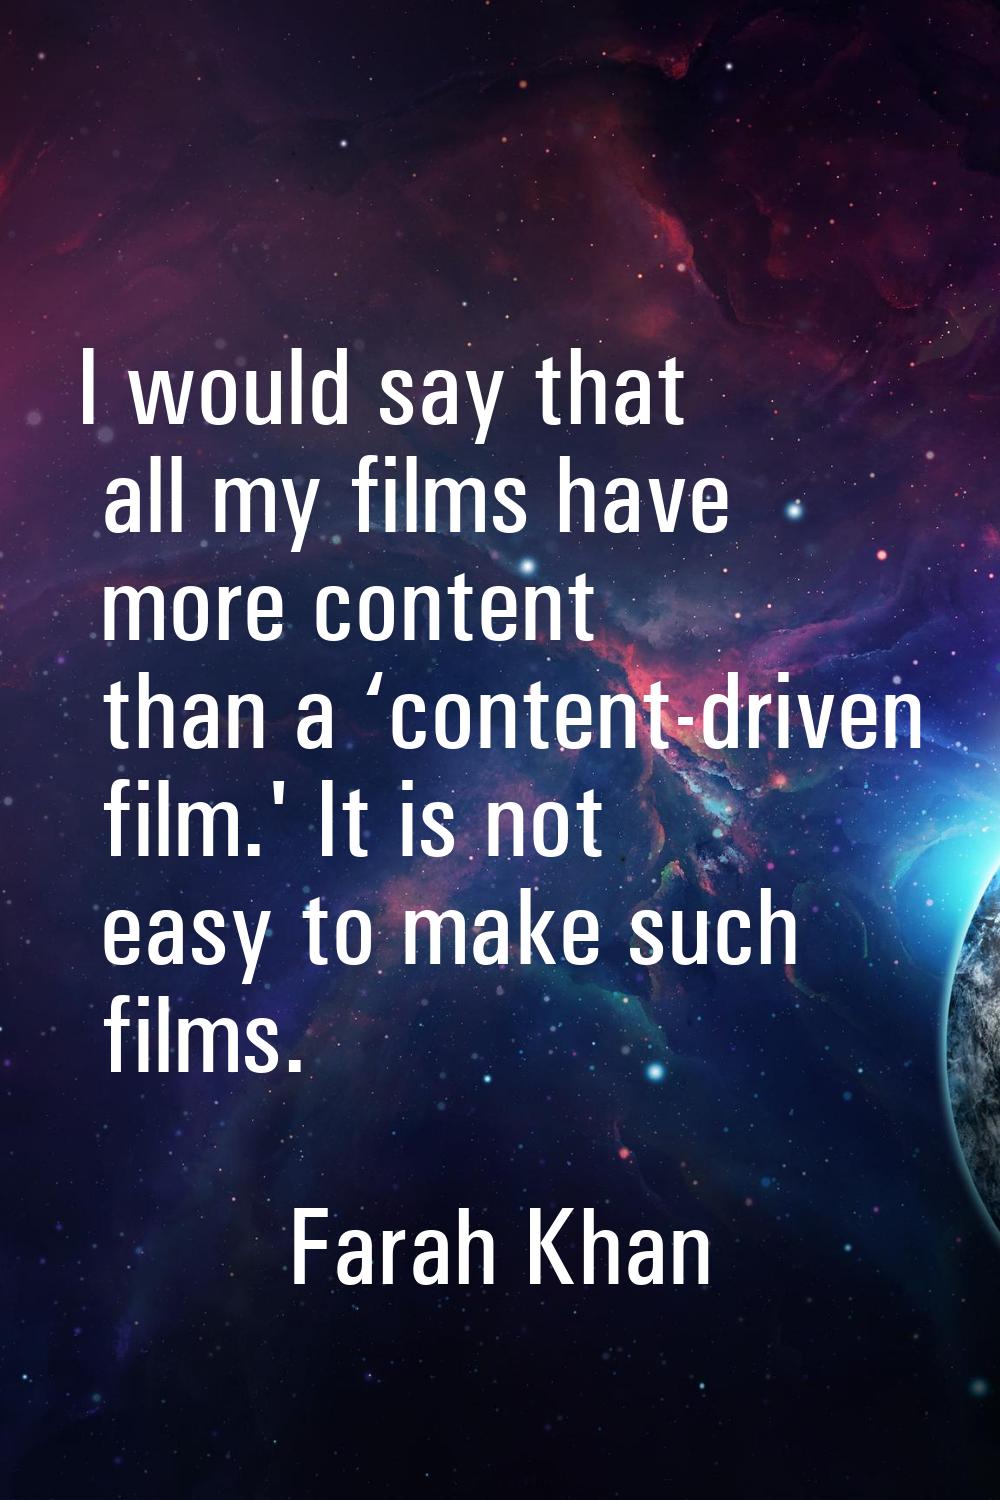 I would say that all my films have more content than a ‘content-driven film.' It is not easy to mak